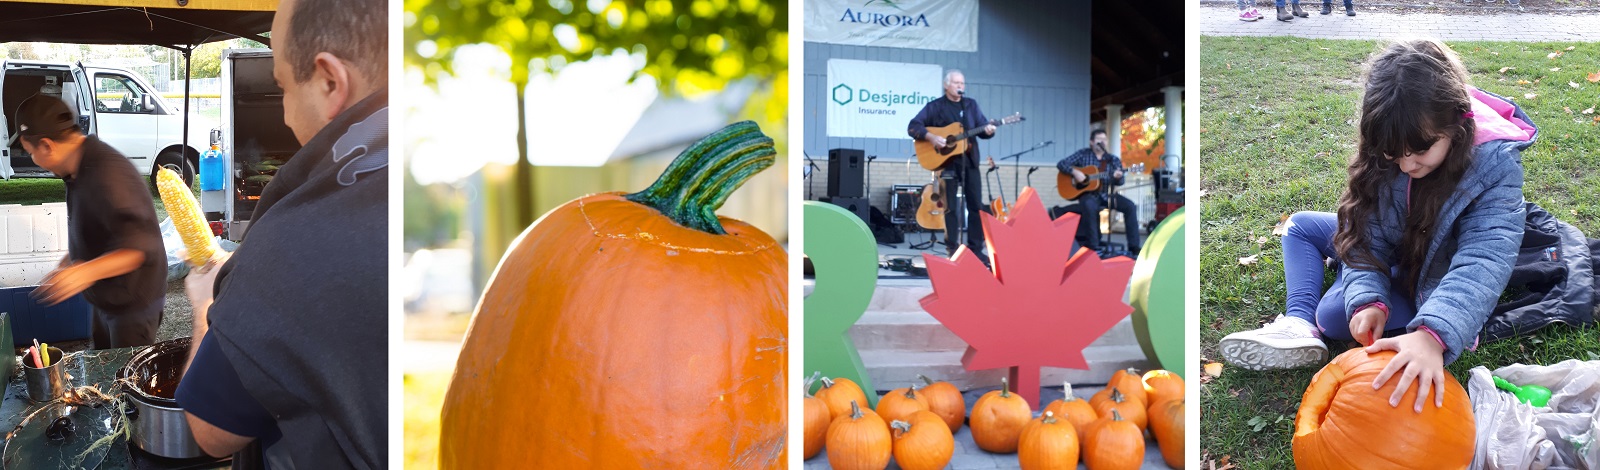 Photos from event - corn on the cob, pumpkin carving, concert